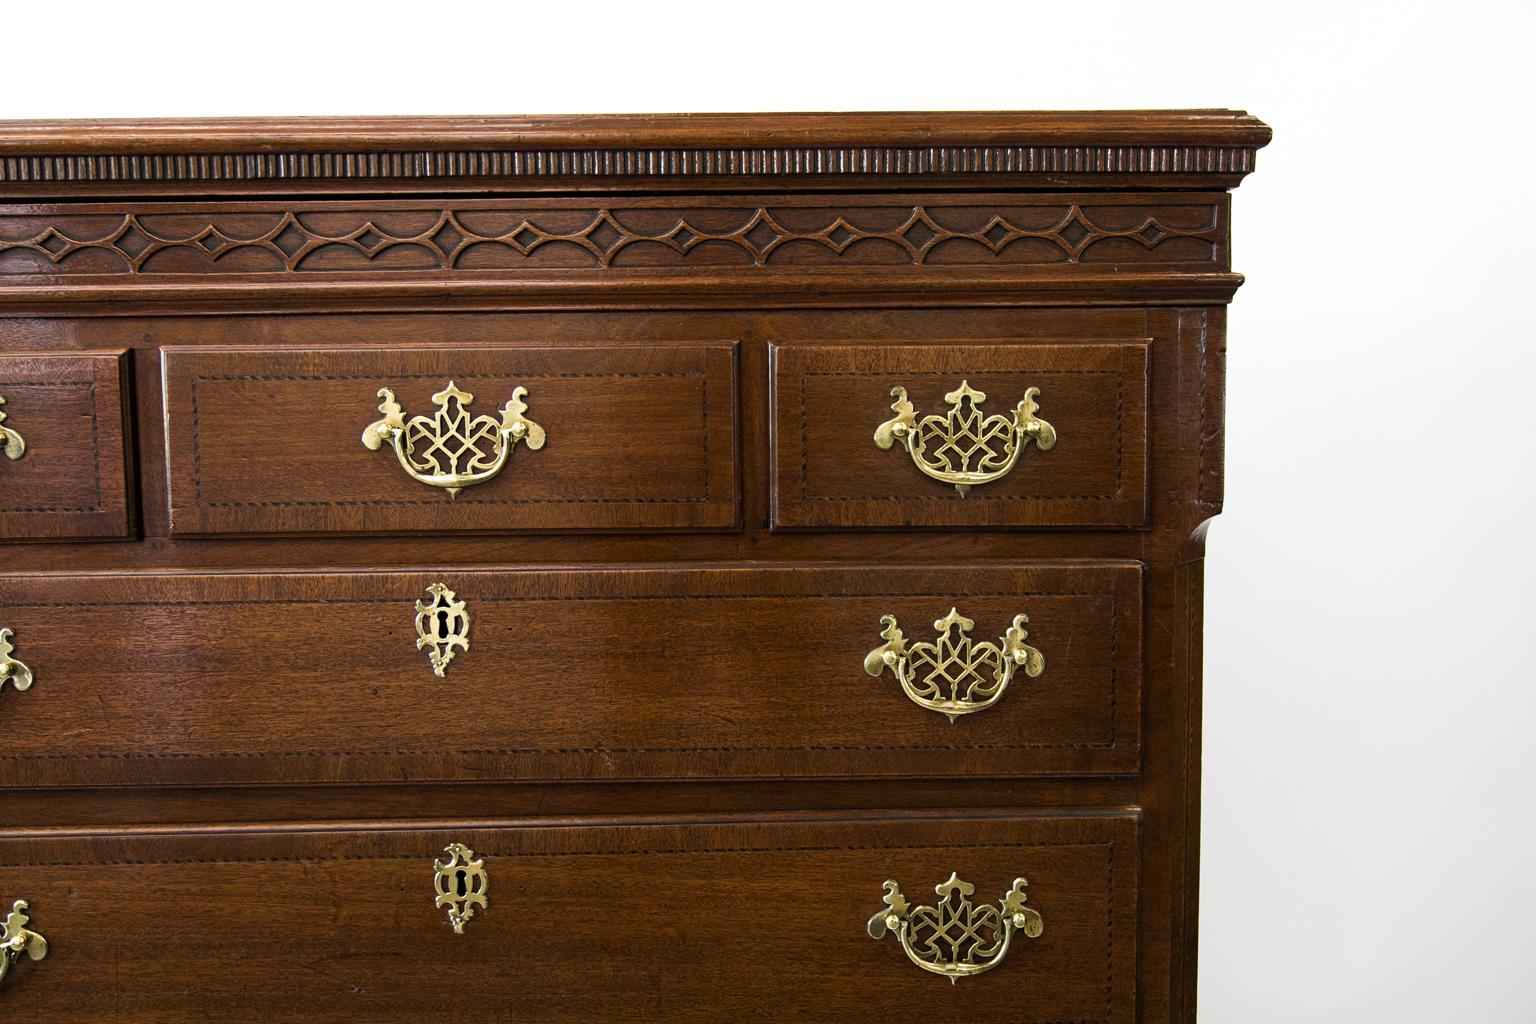 English walnut tall chest, has seven drawers and a crossbanded and ogee molded top with ribbed molding below. The frieze has blind fretwork which disguises a secret drawer which cannot be opened without opening the uppermost long drawer. This long